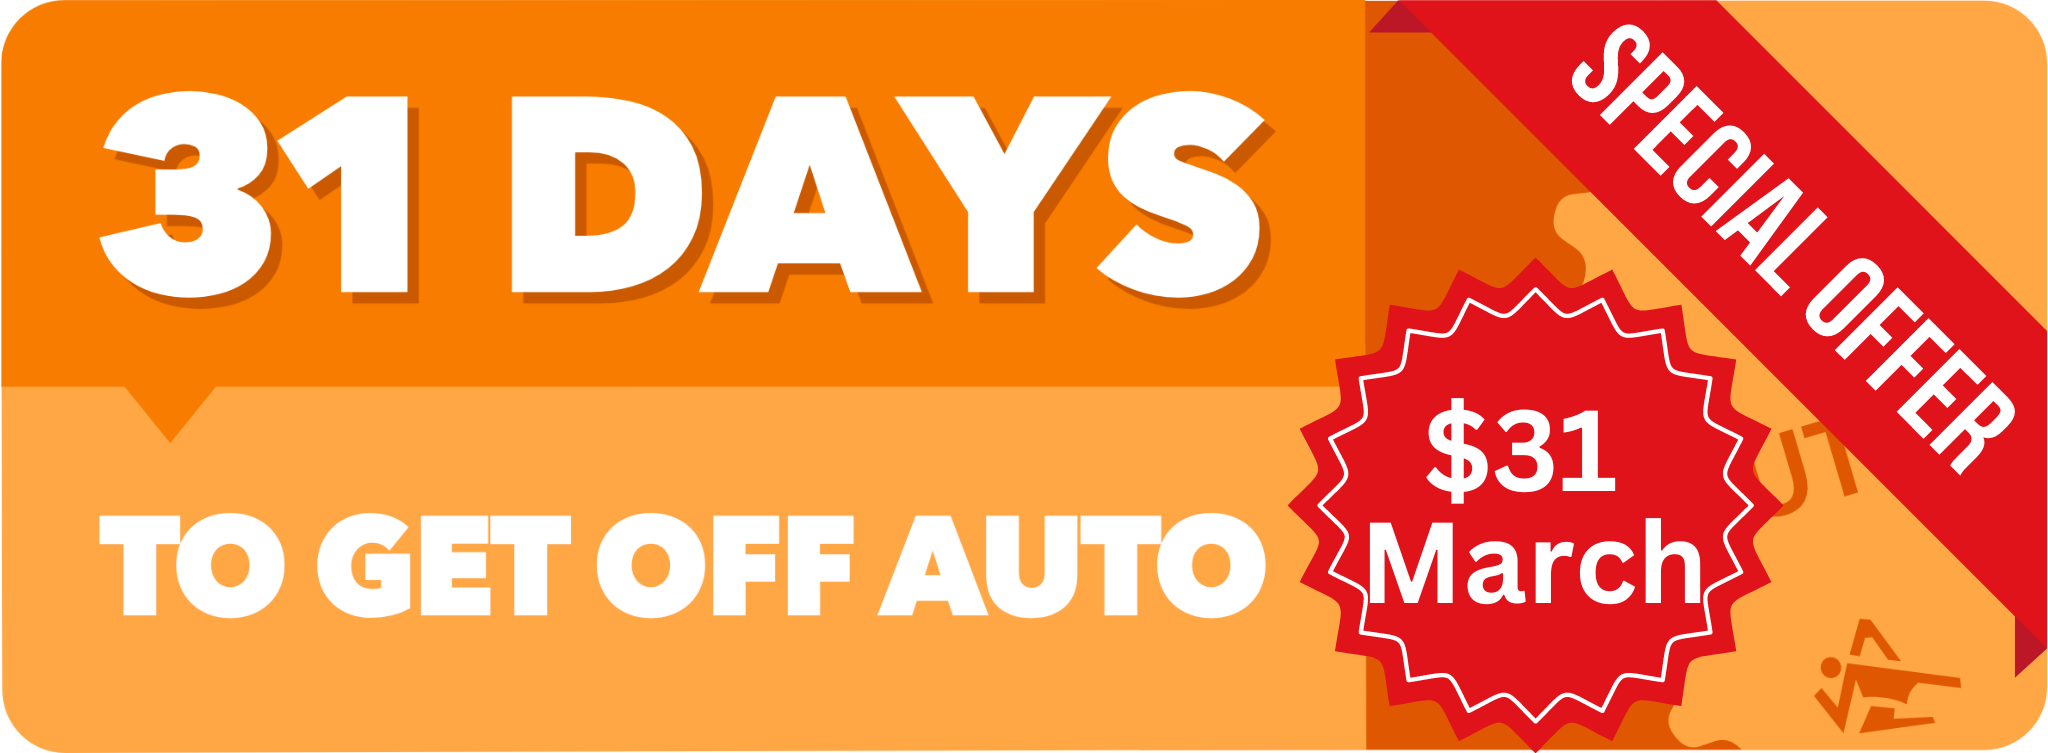 31 Days To Get Off Auto for $31 Offer